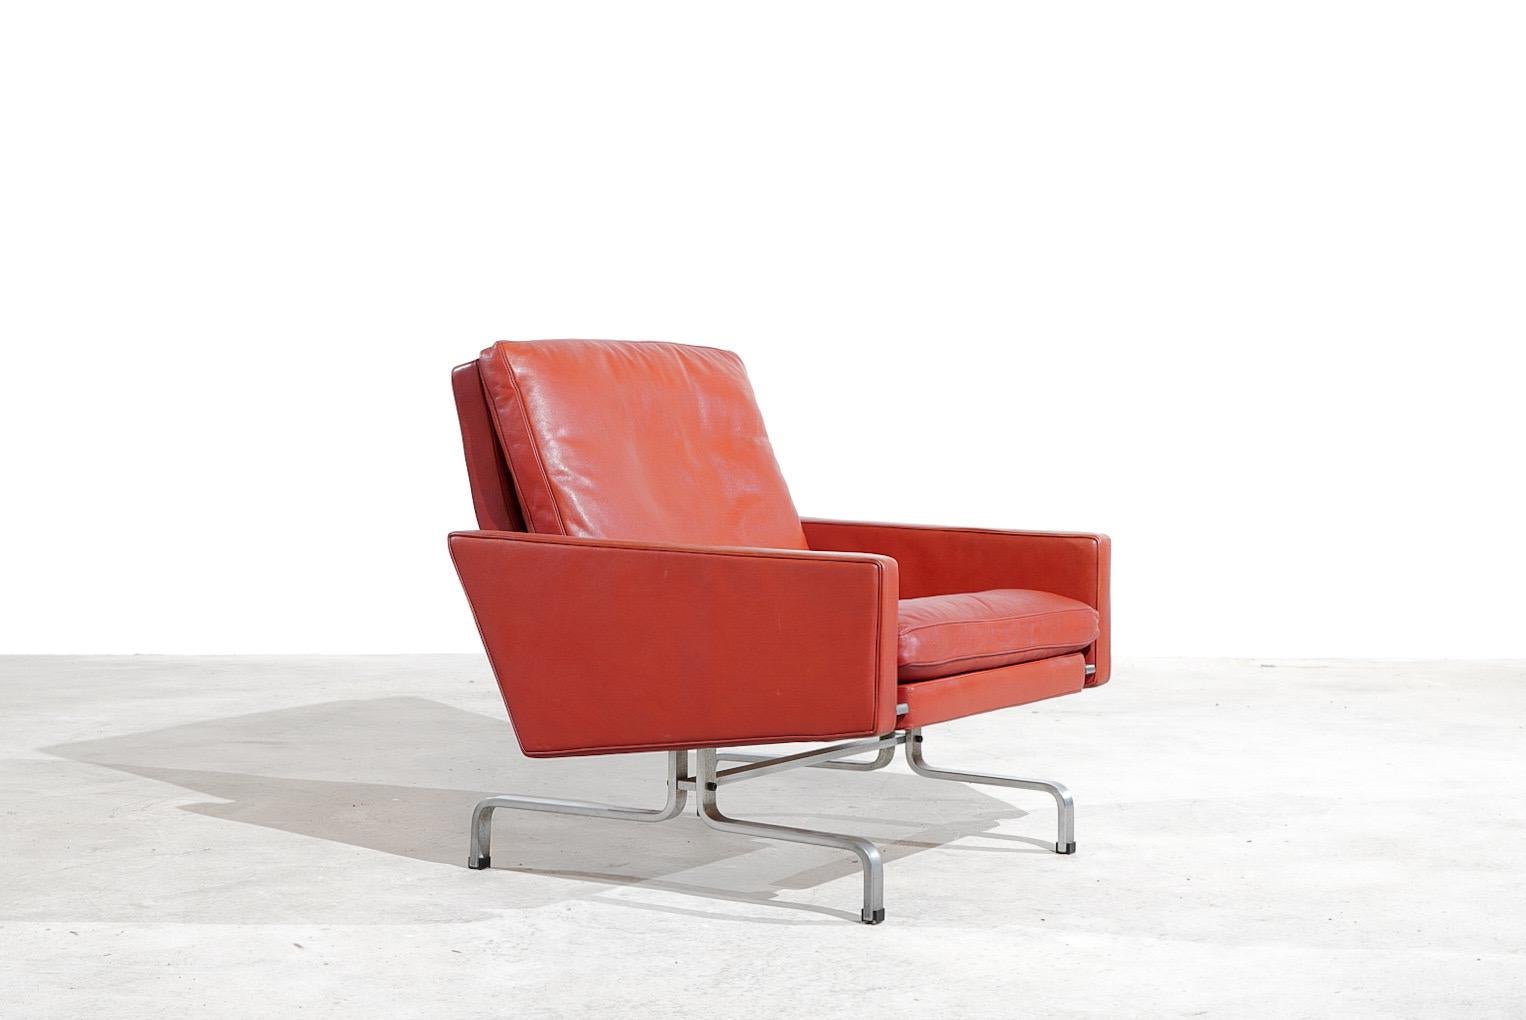 Amazing lounge chair designed by Poul Kjaerholm and manufactured by Ejvind Kold Christensen, Denmark 1957. 

This lounge chair has a very nice original patina and fully original natural leather covers and are in amazing condition, the leather shows